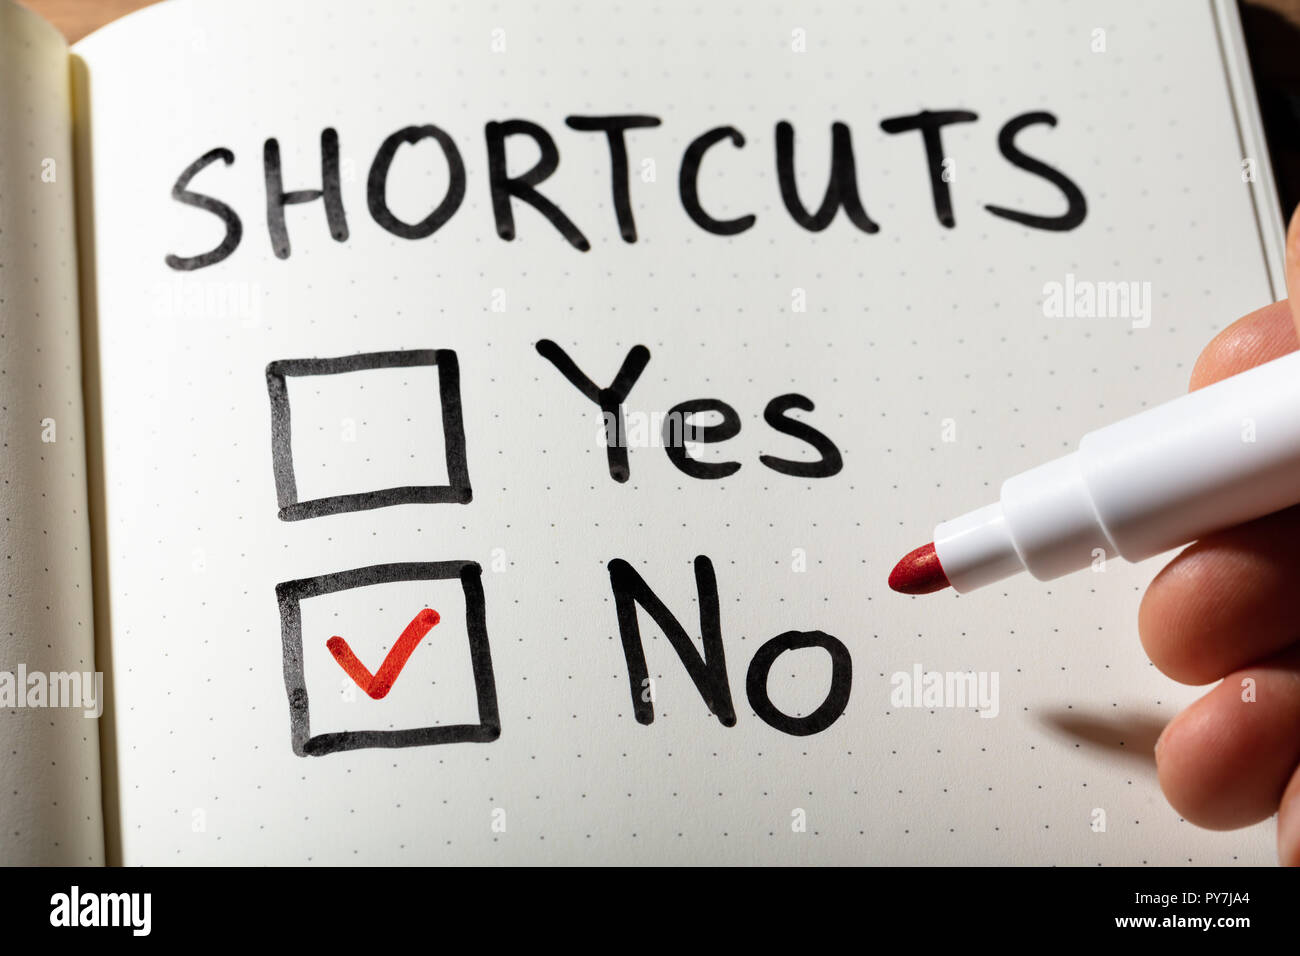 A Person Holding Marker Over Notebook With Shortcuts Word Showing Yes And No Option Stock Photo